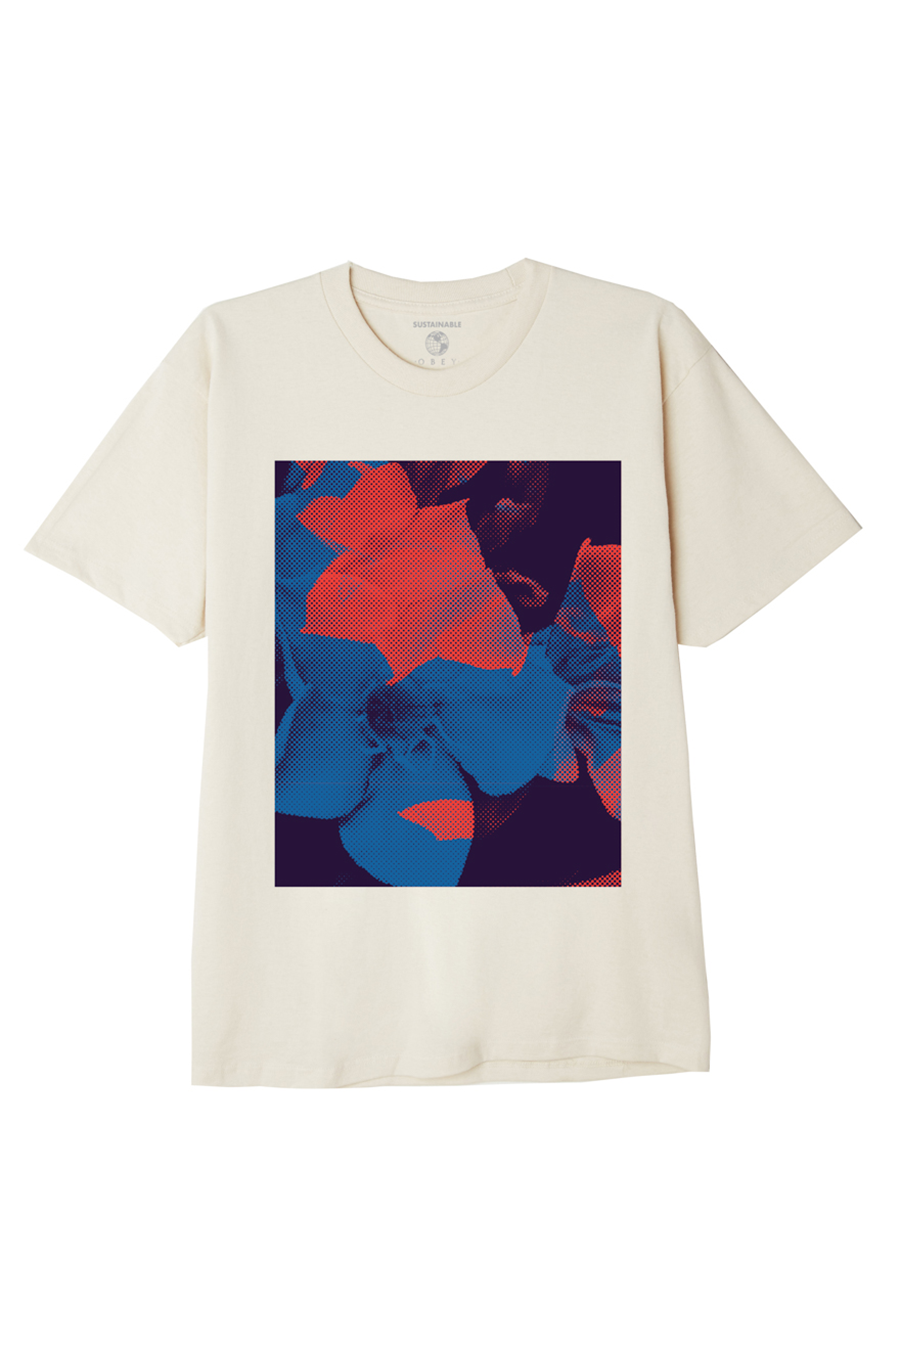 Intl Power Equality Sustainable Tee | Cream - Main Image Number 1 of 2